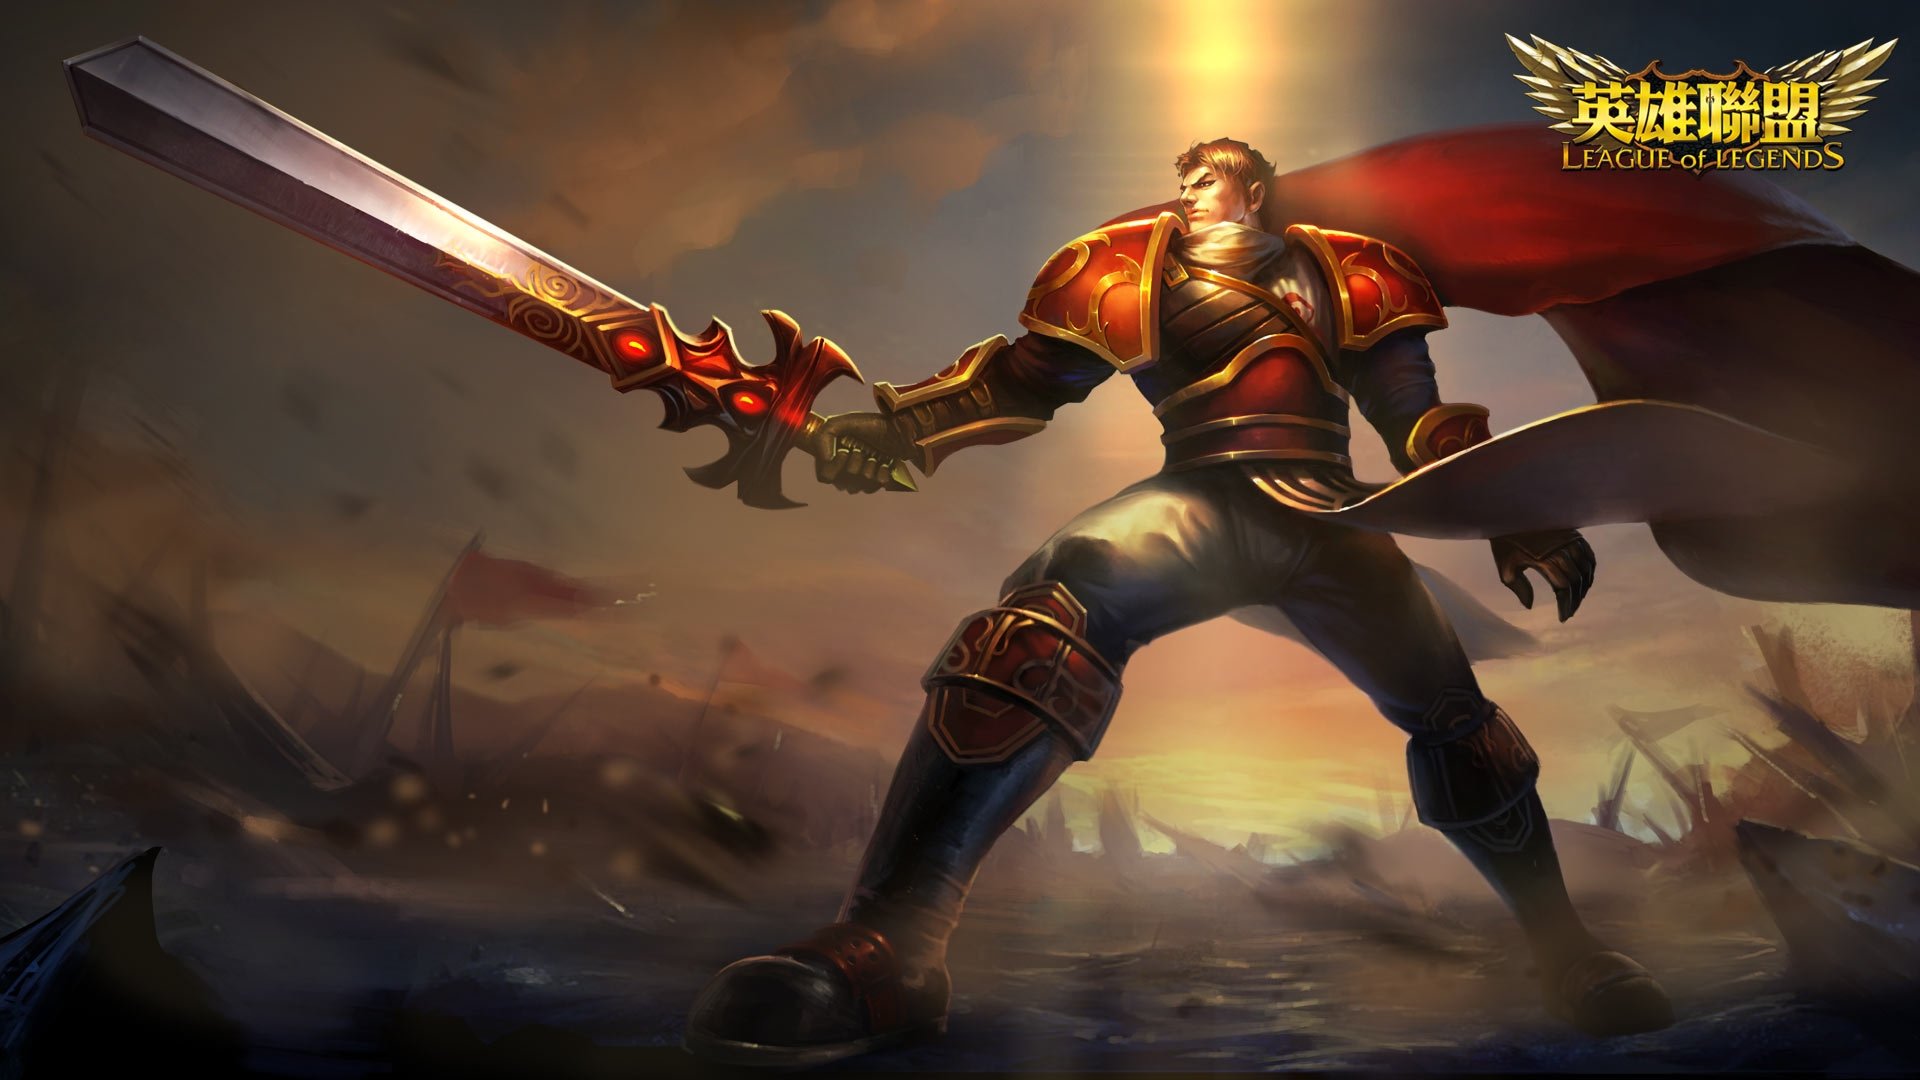 Garen Full HD Wallpaper and Background Image | 1920x1080 | ID:383534
